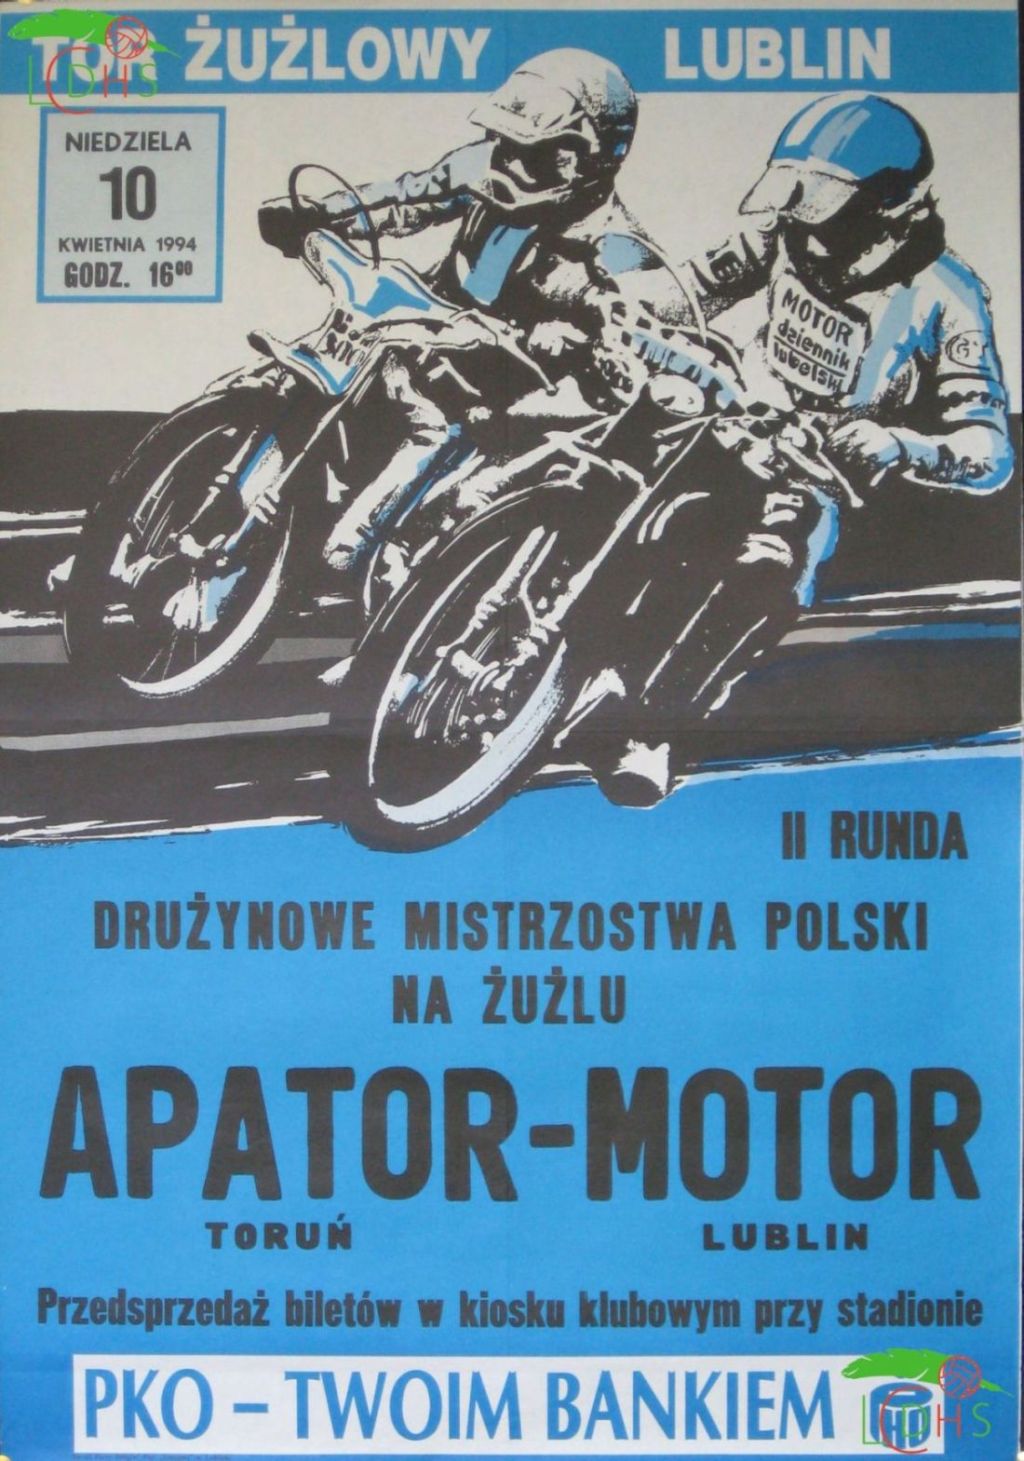 Lublin speedway poster (1994).